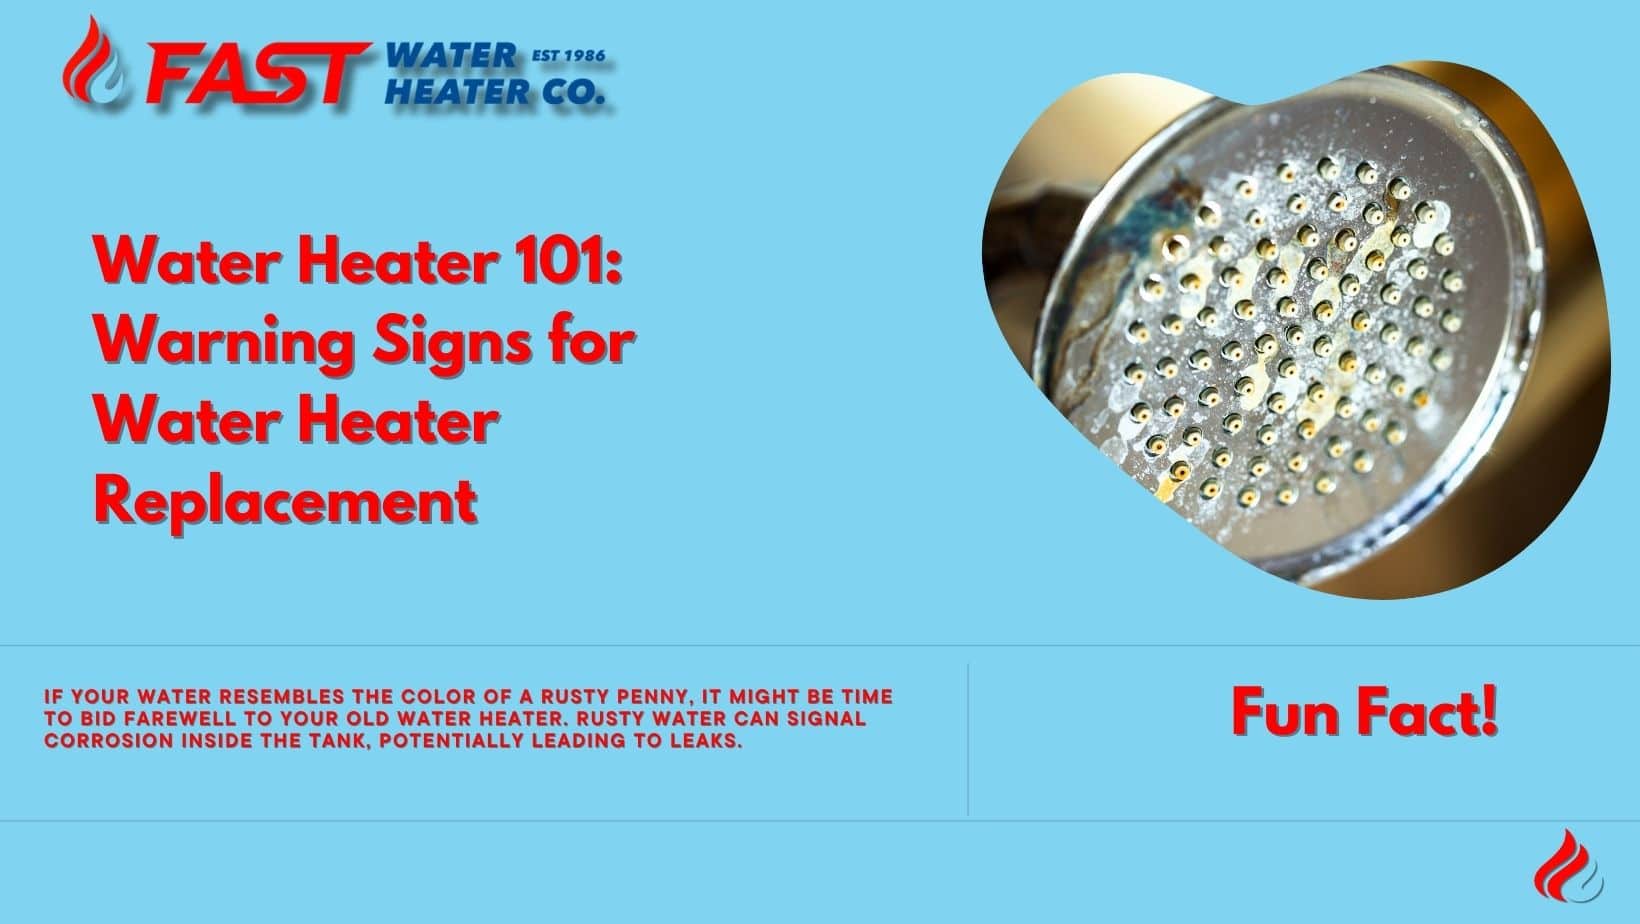 Water Heater 101: Warning Signs for Water Heater Replacement